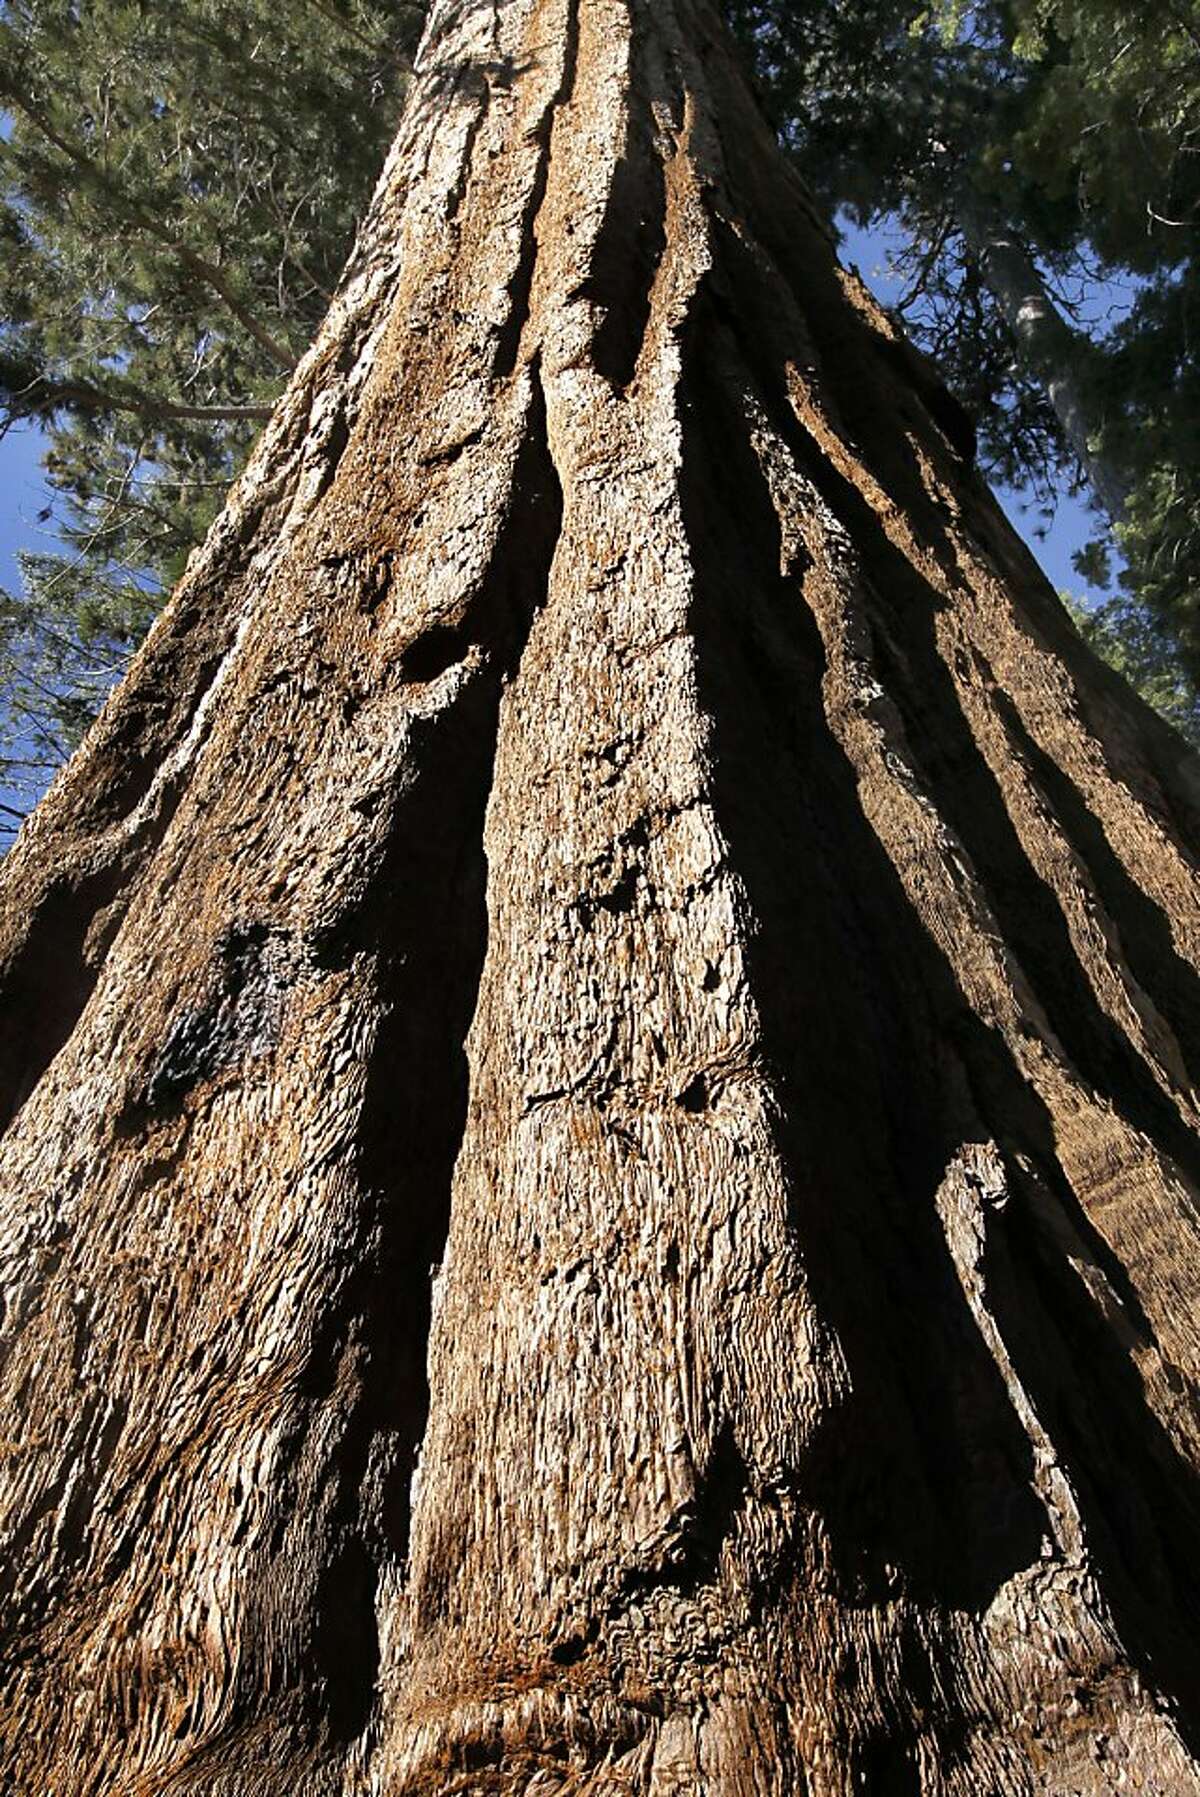 Some of the trees may exceed 3,000 years of age at the Mariposa Grove of Giant Sequoias in Yosemite National Park. Yosemite National Park on Tuesday Feb. 26, 2013, has released the Restoration of the Mariposa Grove of Giant Sequoias Draft Environmental Impact Statement with the primary goal being to restore giant sequoia habitat and improve the visitor experience.